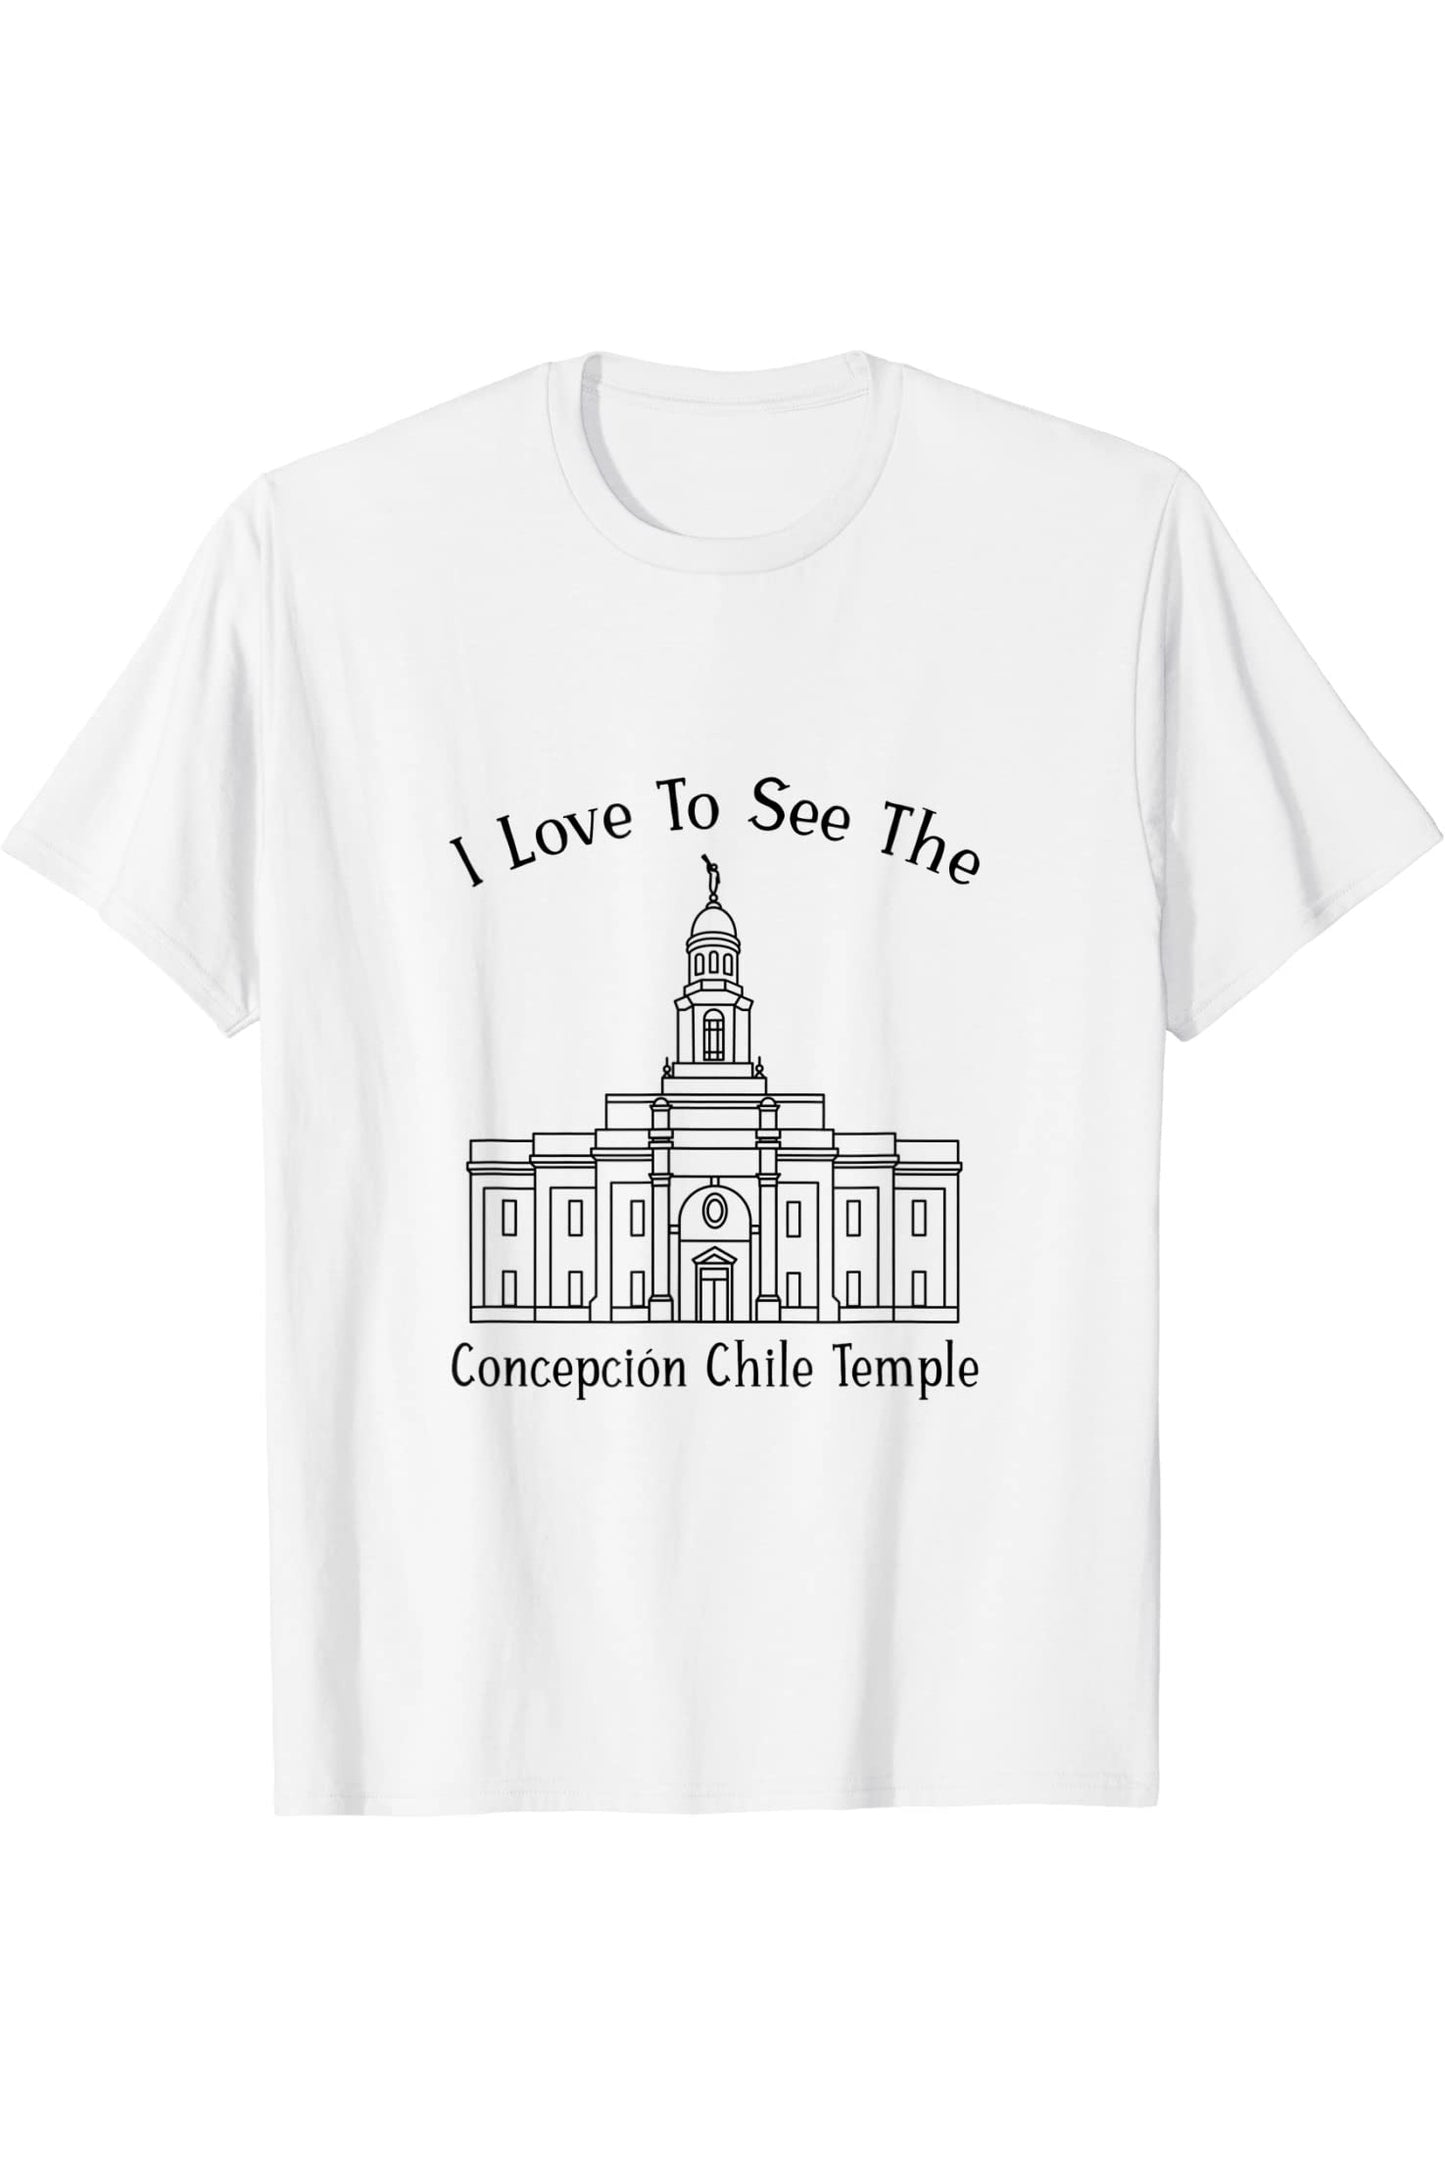 Concepcion Chile Temple T-Shirt - Happy Style (English) US